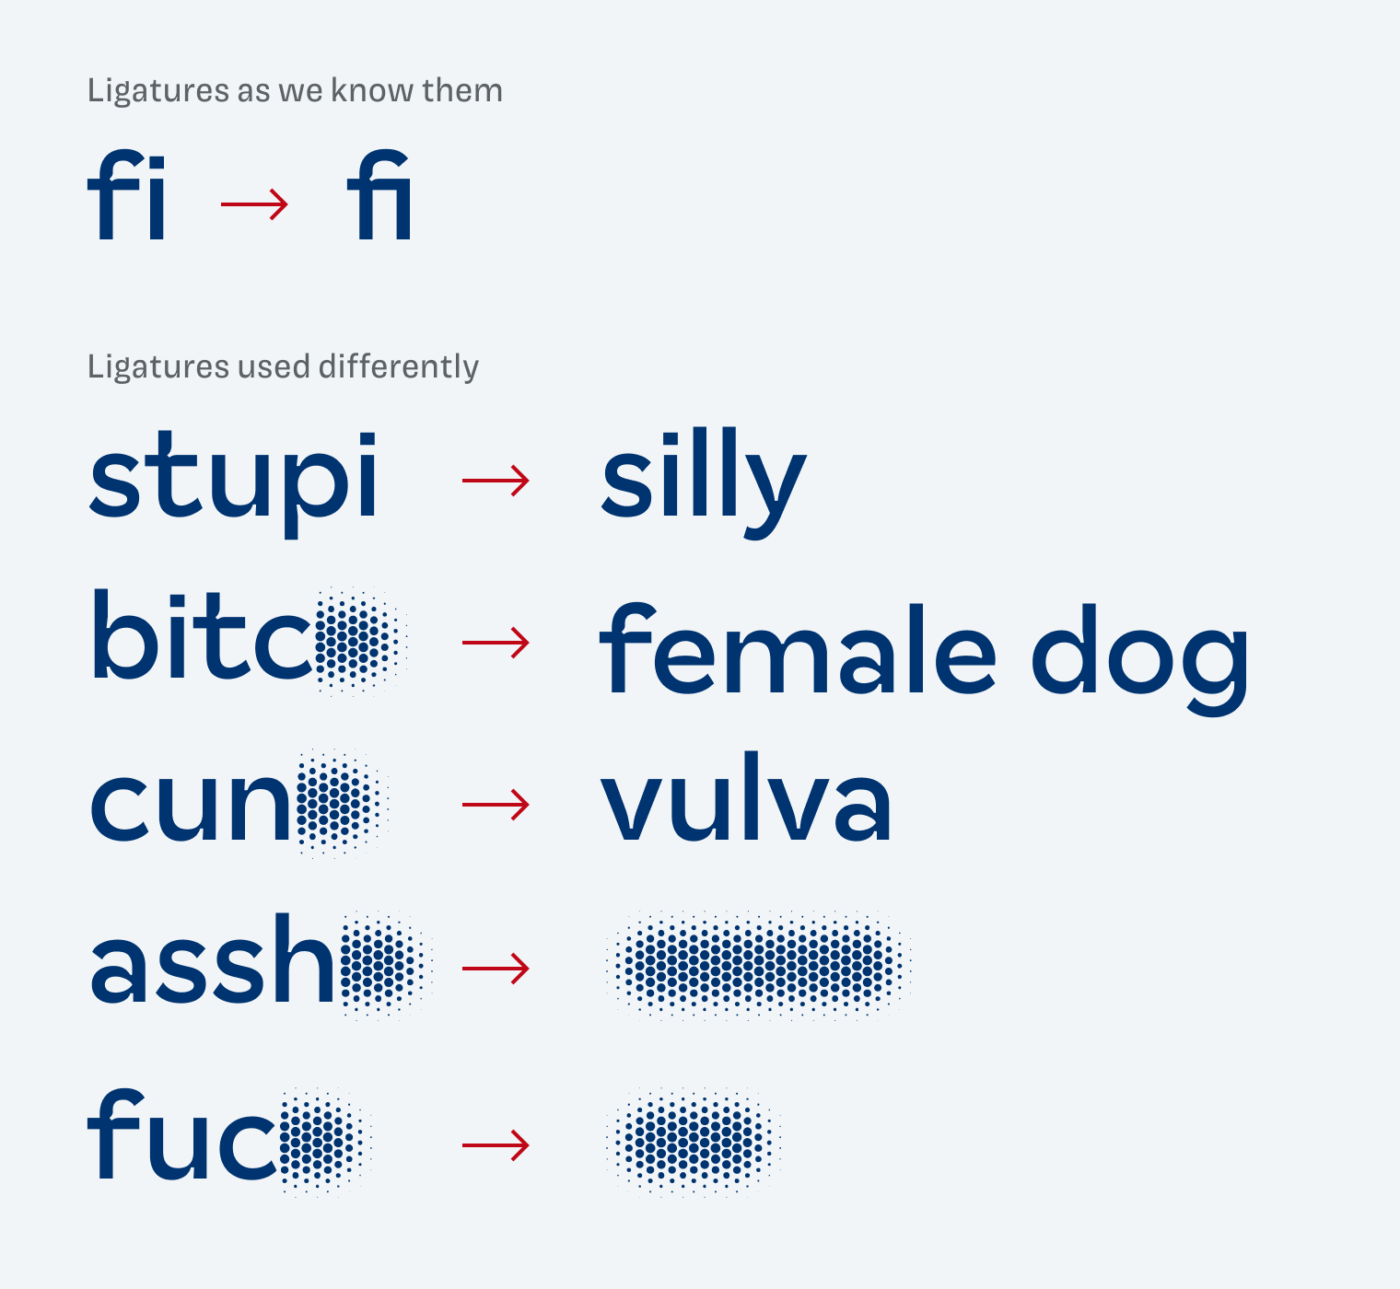 stupi_ gets replaces by silly, bitc_ turns to female dog, fuc_ gets gets bulrred, cun_ gets replaced by vulva, pric_ gets blurred